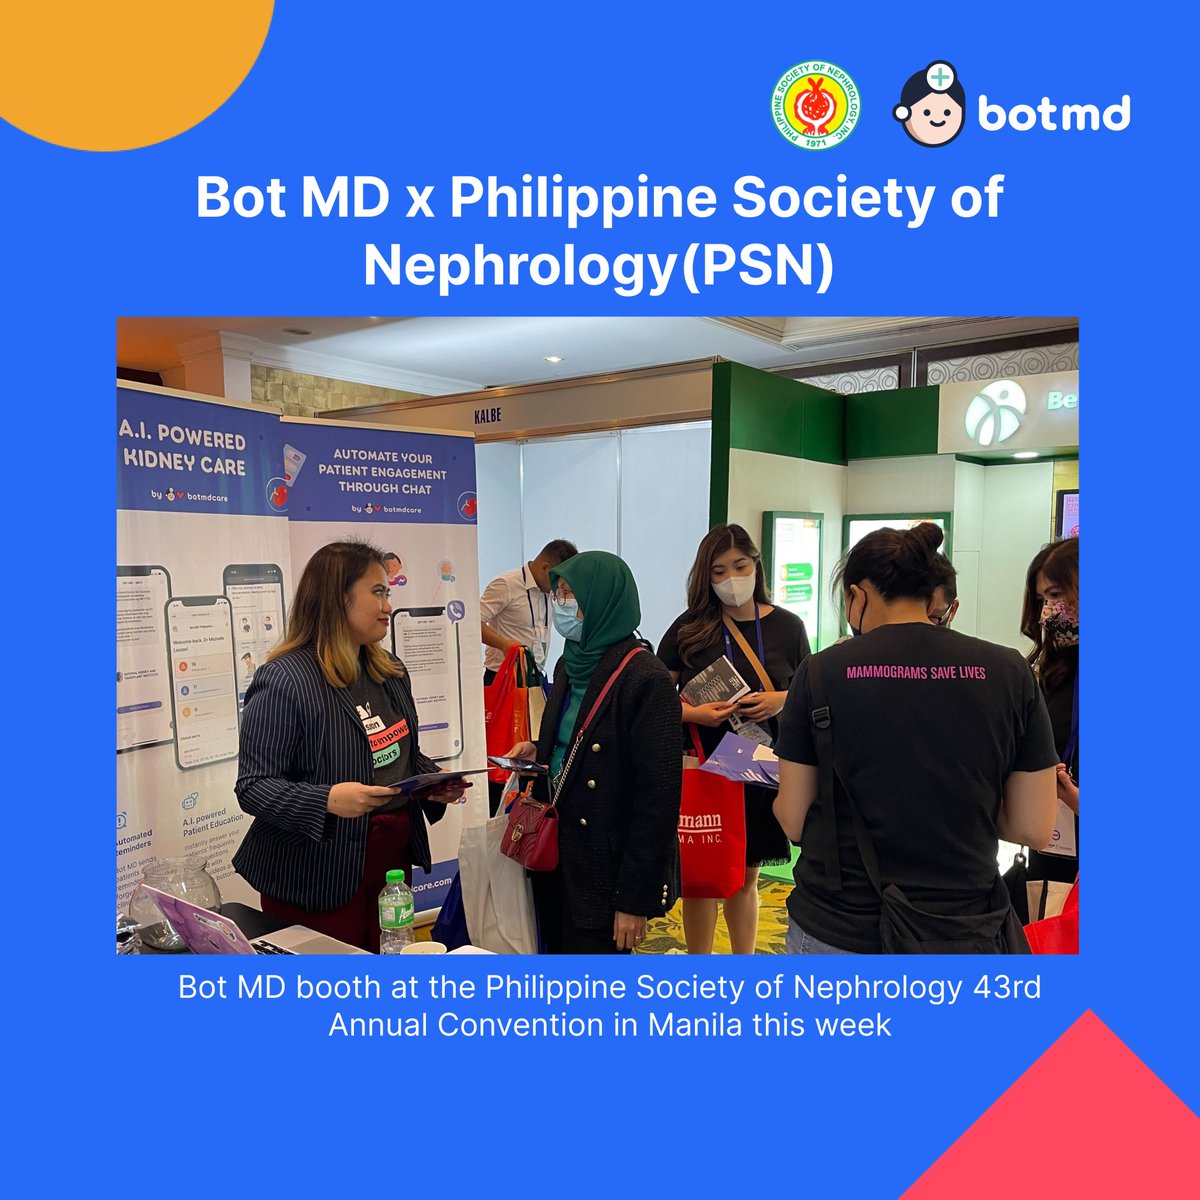 Bot MD with Dr @maaliddin and Dr Romina Danguilan of @NKTIgovph at the @PSNkidney 43rd Annual Convention, sharing how Bot MD Care can automate patient engagement and education with Facebook Messenger and Viber in the Philippines  💬🙋🏻‍♀️🙋🏻‍♂️🇵🇭